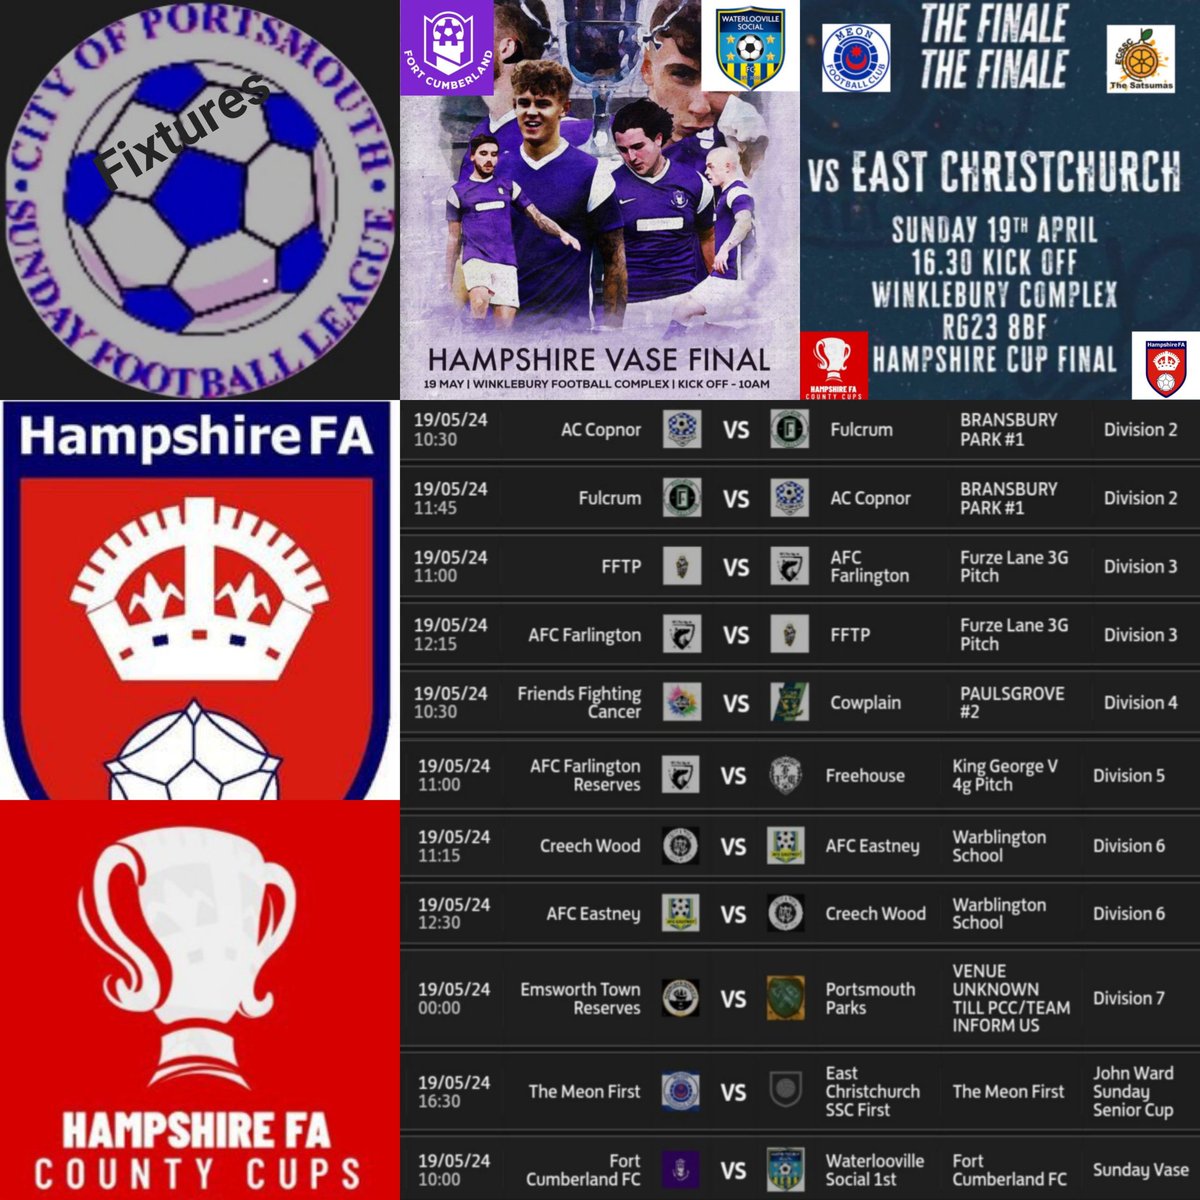 ⚽️ Sunday Fixtures ⚽️
    @the_portsmouth 

What a 🏆day for, @fortcumberland v @VilleSocialFC at 10.0am
.. and @FcMeon at 4.30pm

All the best at @WinkleburyHFA in the @HFA_CountyCups #Finals 👏

.. and enjoy the #League games, for those teams playing 👍